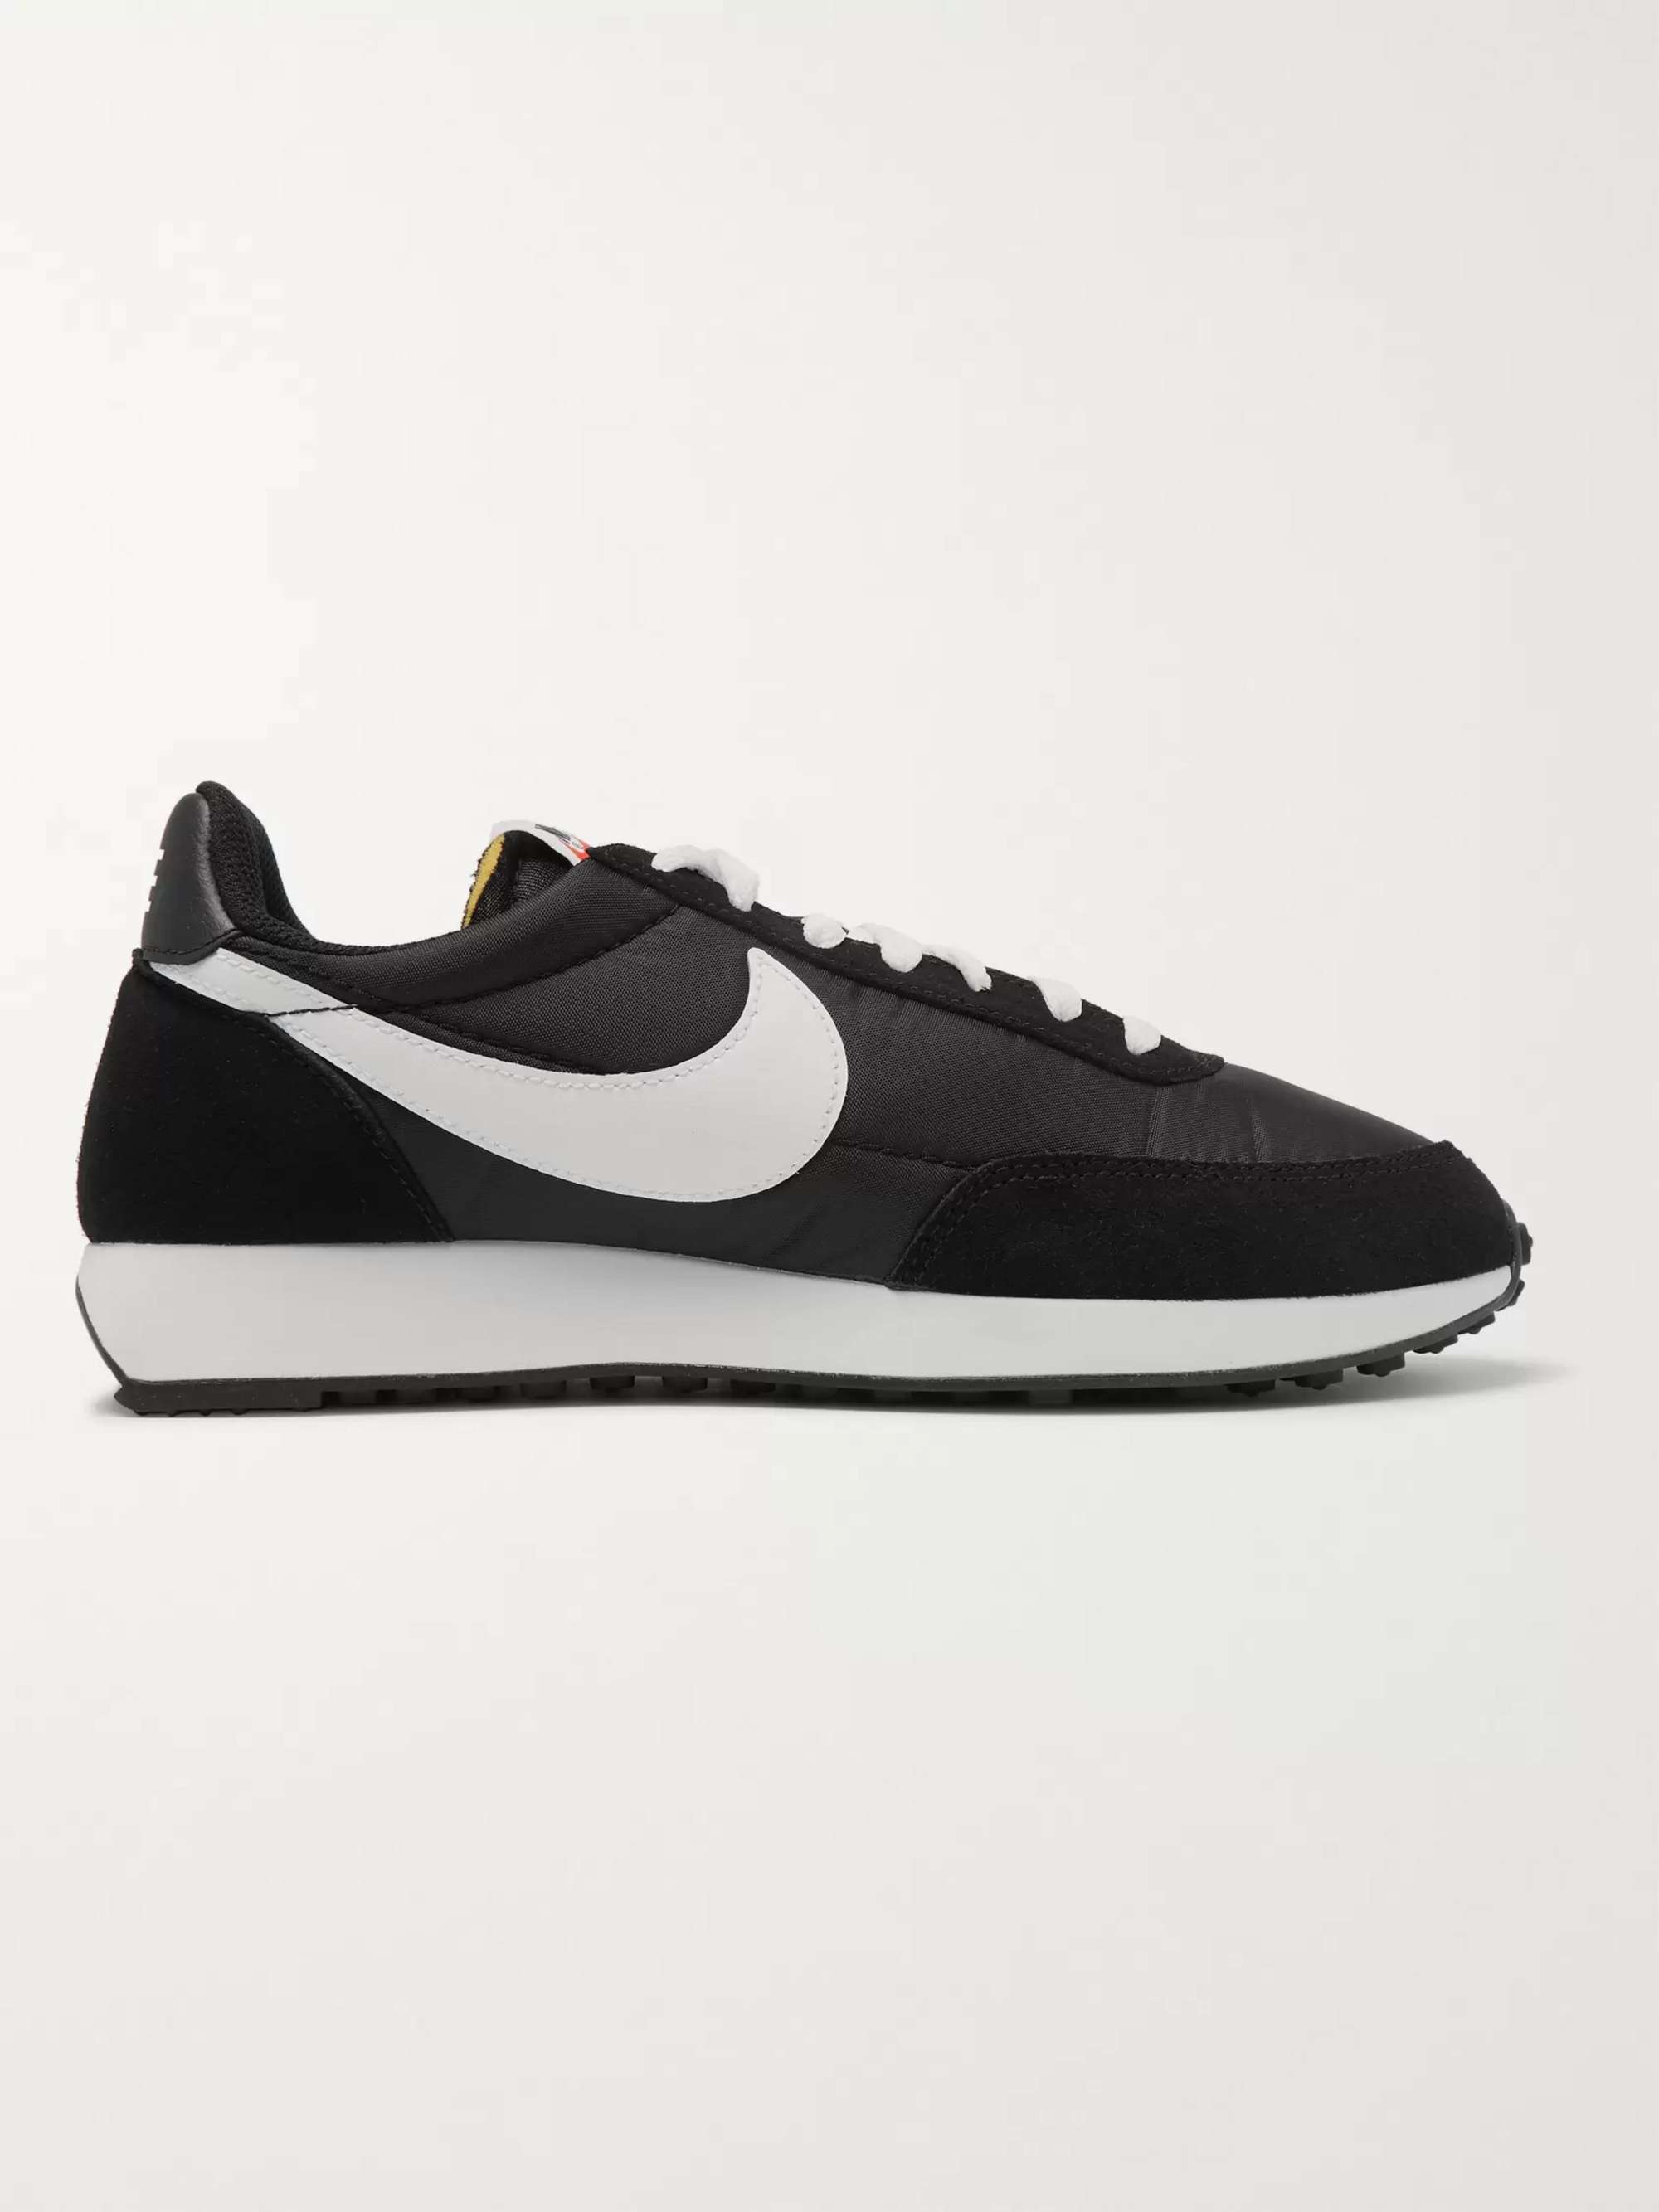 NIKE Air Tailwind 79 Shell, Suede and Leather Sneakers